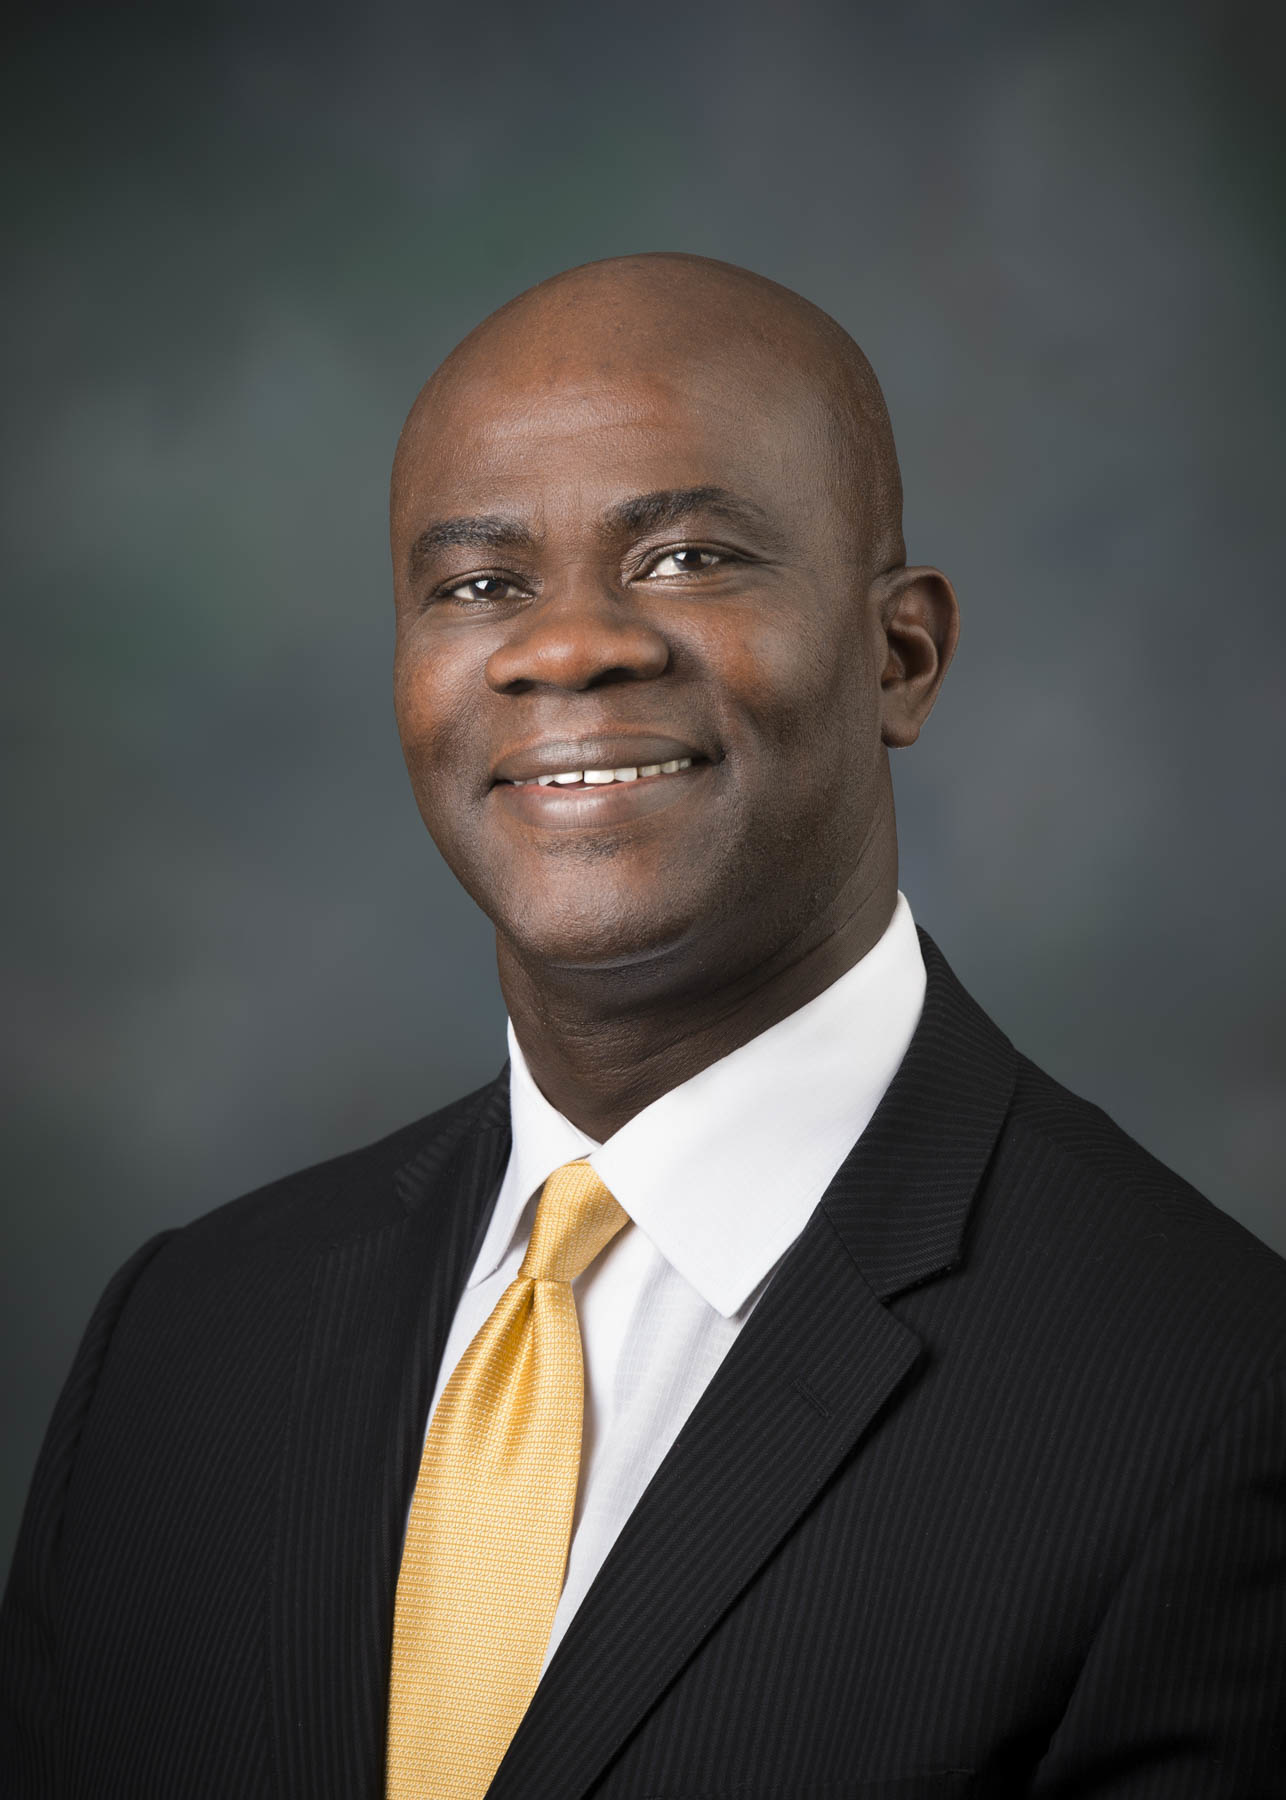 State Transportation Director Paul C. Ajegba